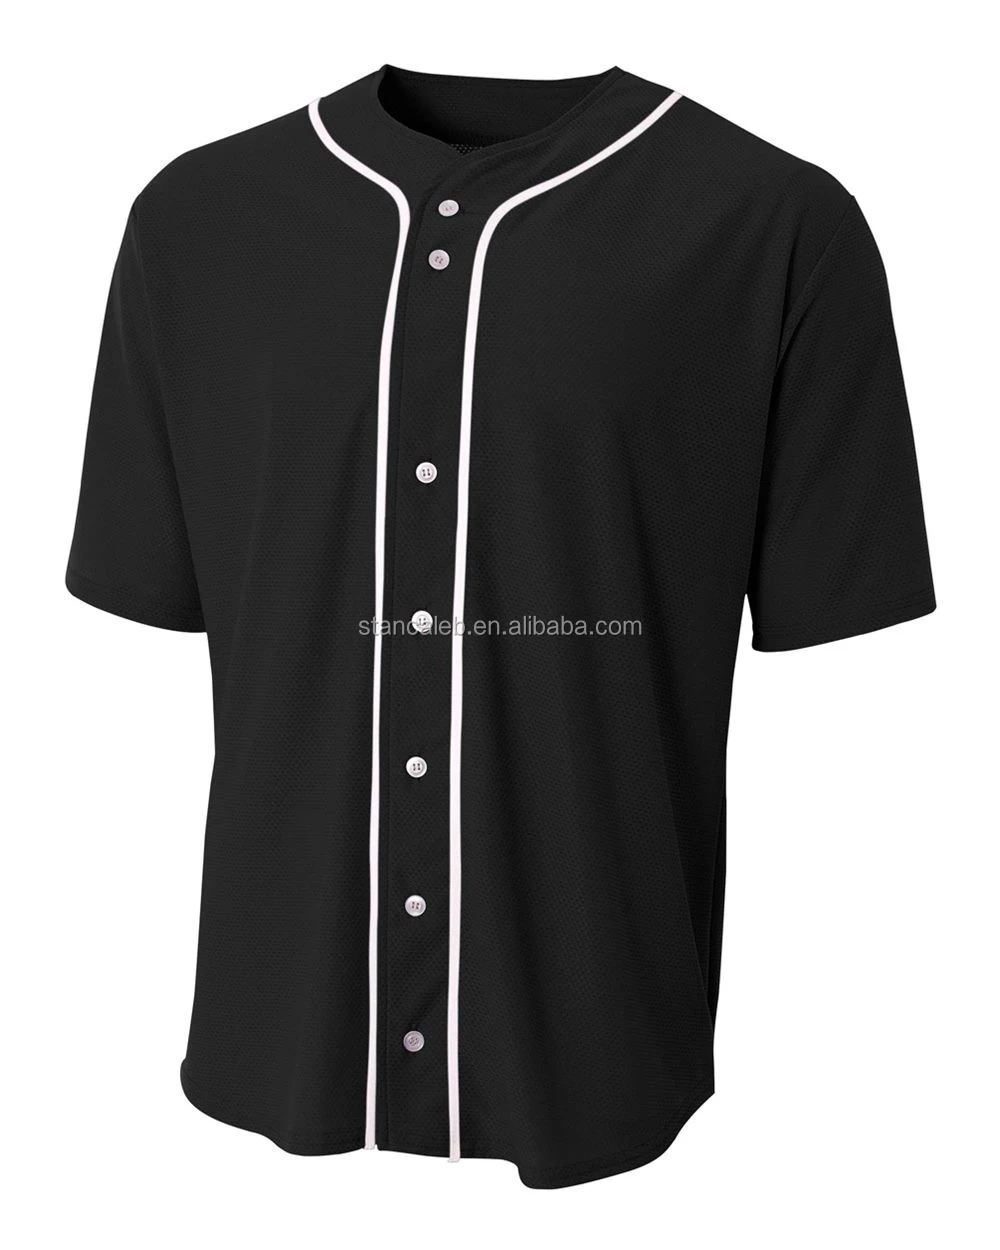 Source Clemente Black Best Quality Stitched Baseball Jersey on m.